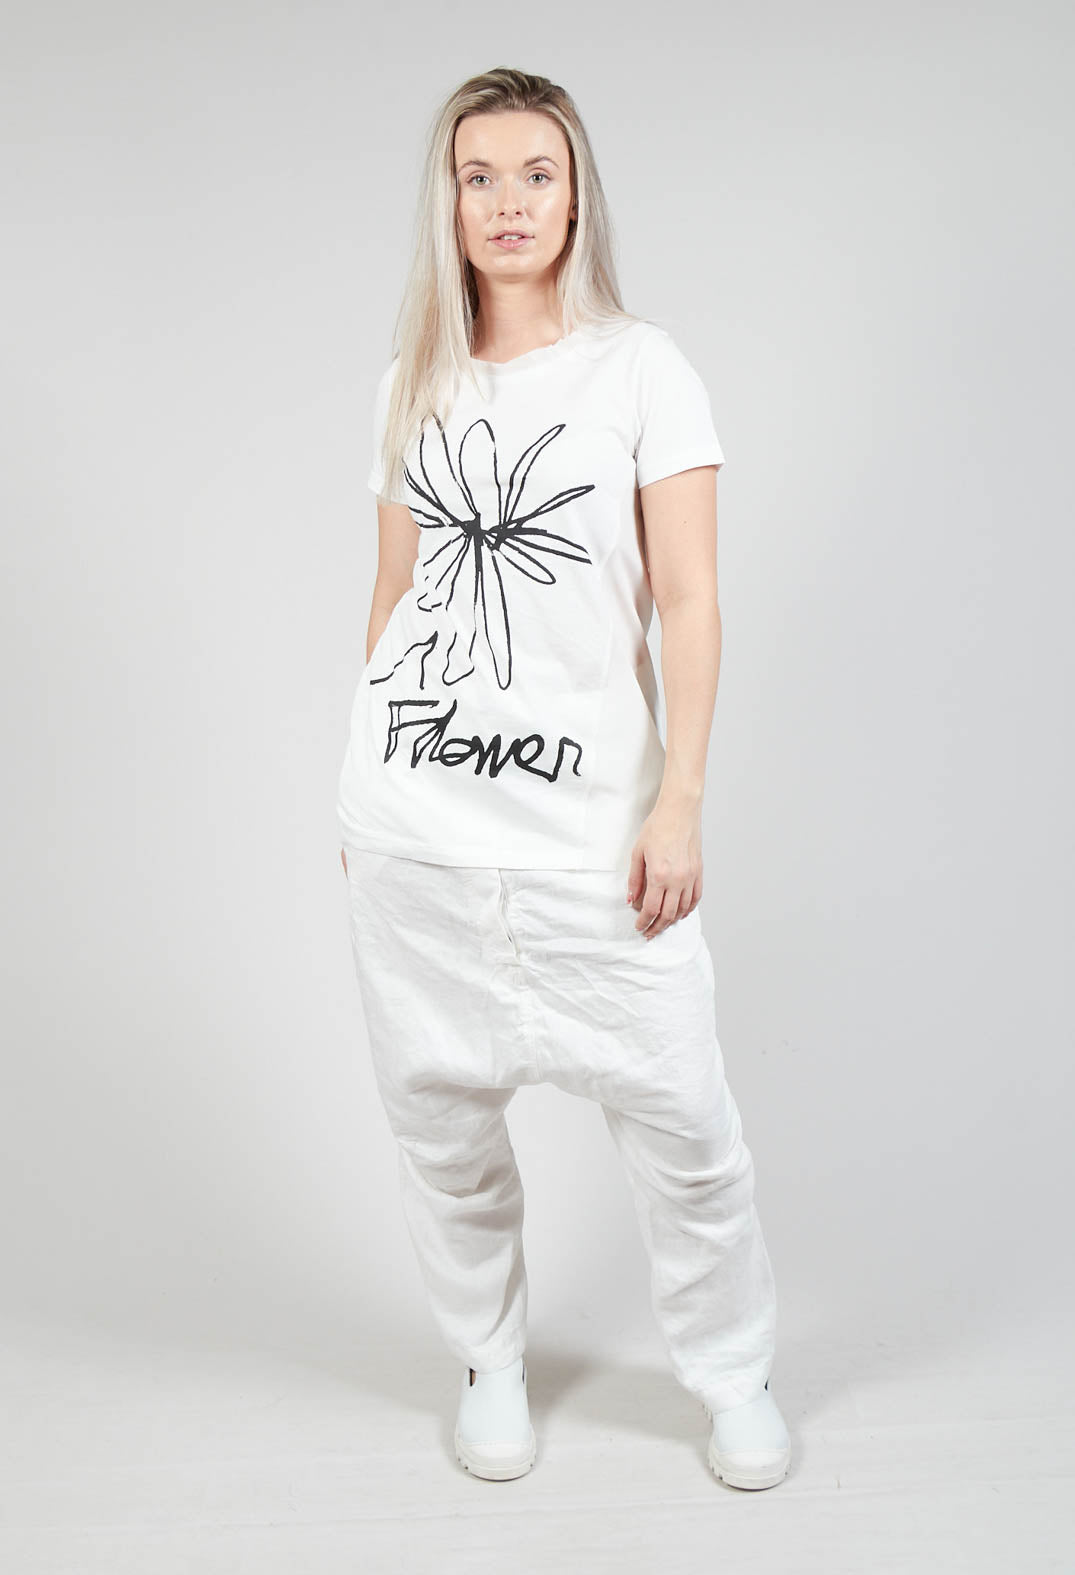 Flower Graphic T-Shirt in White Print